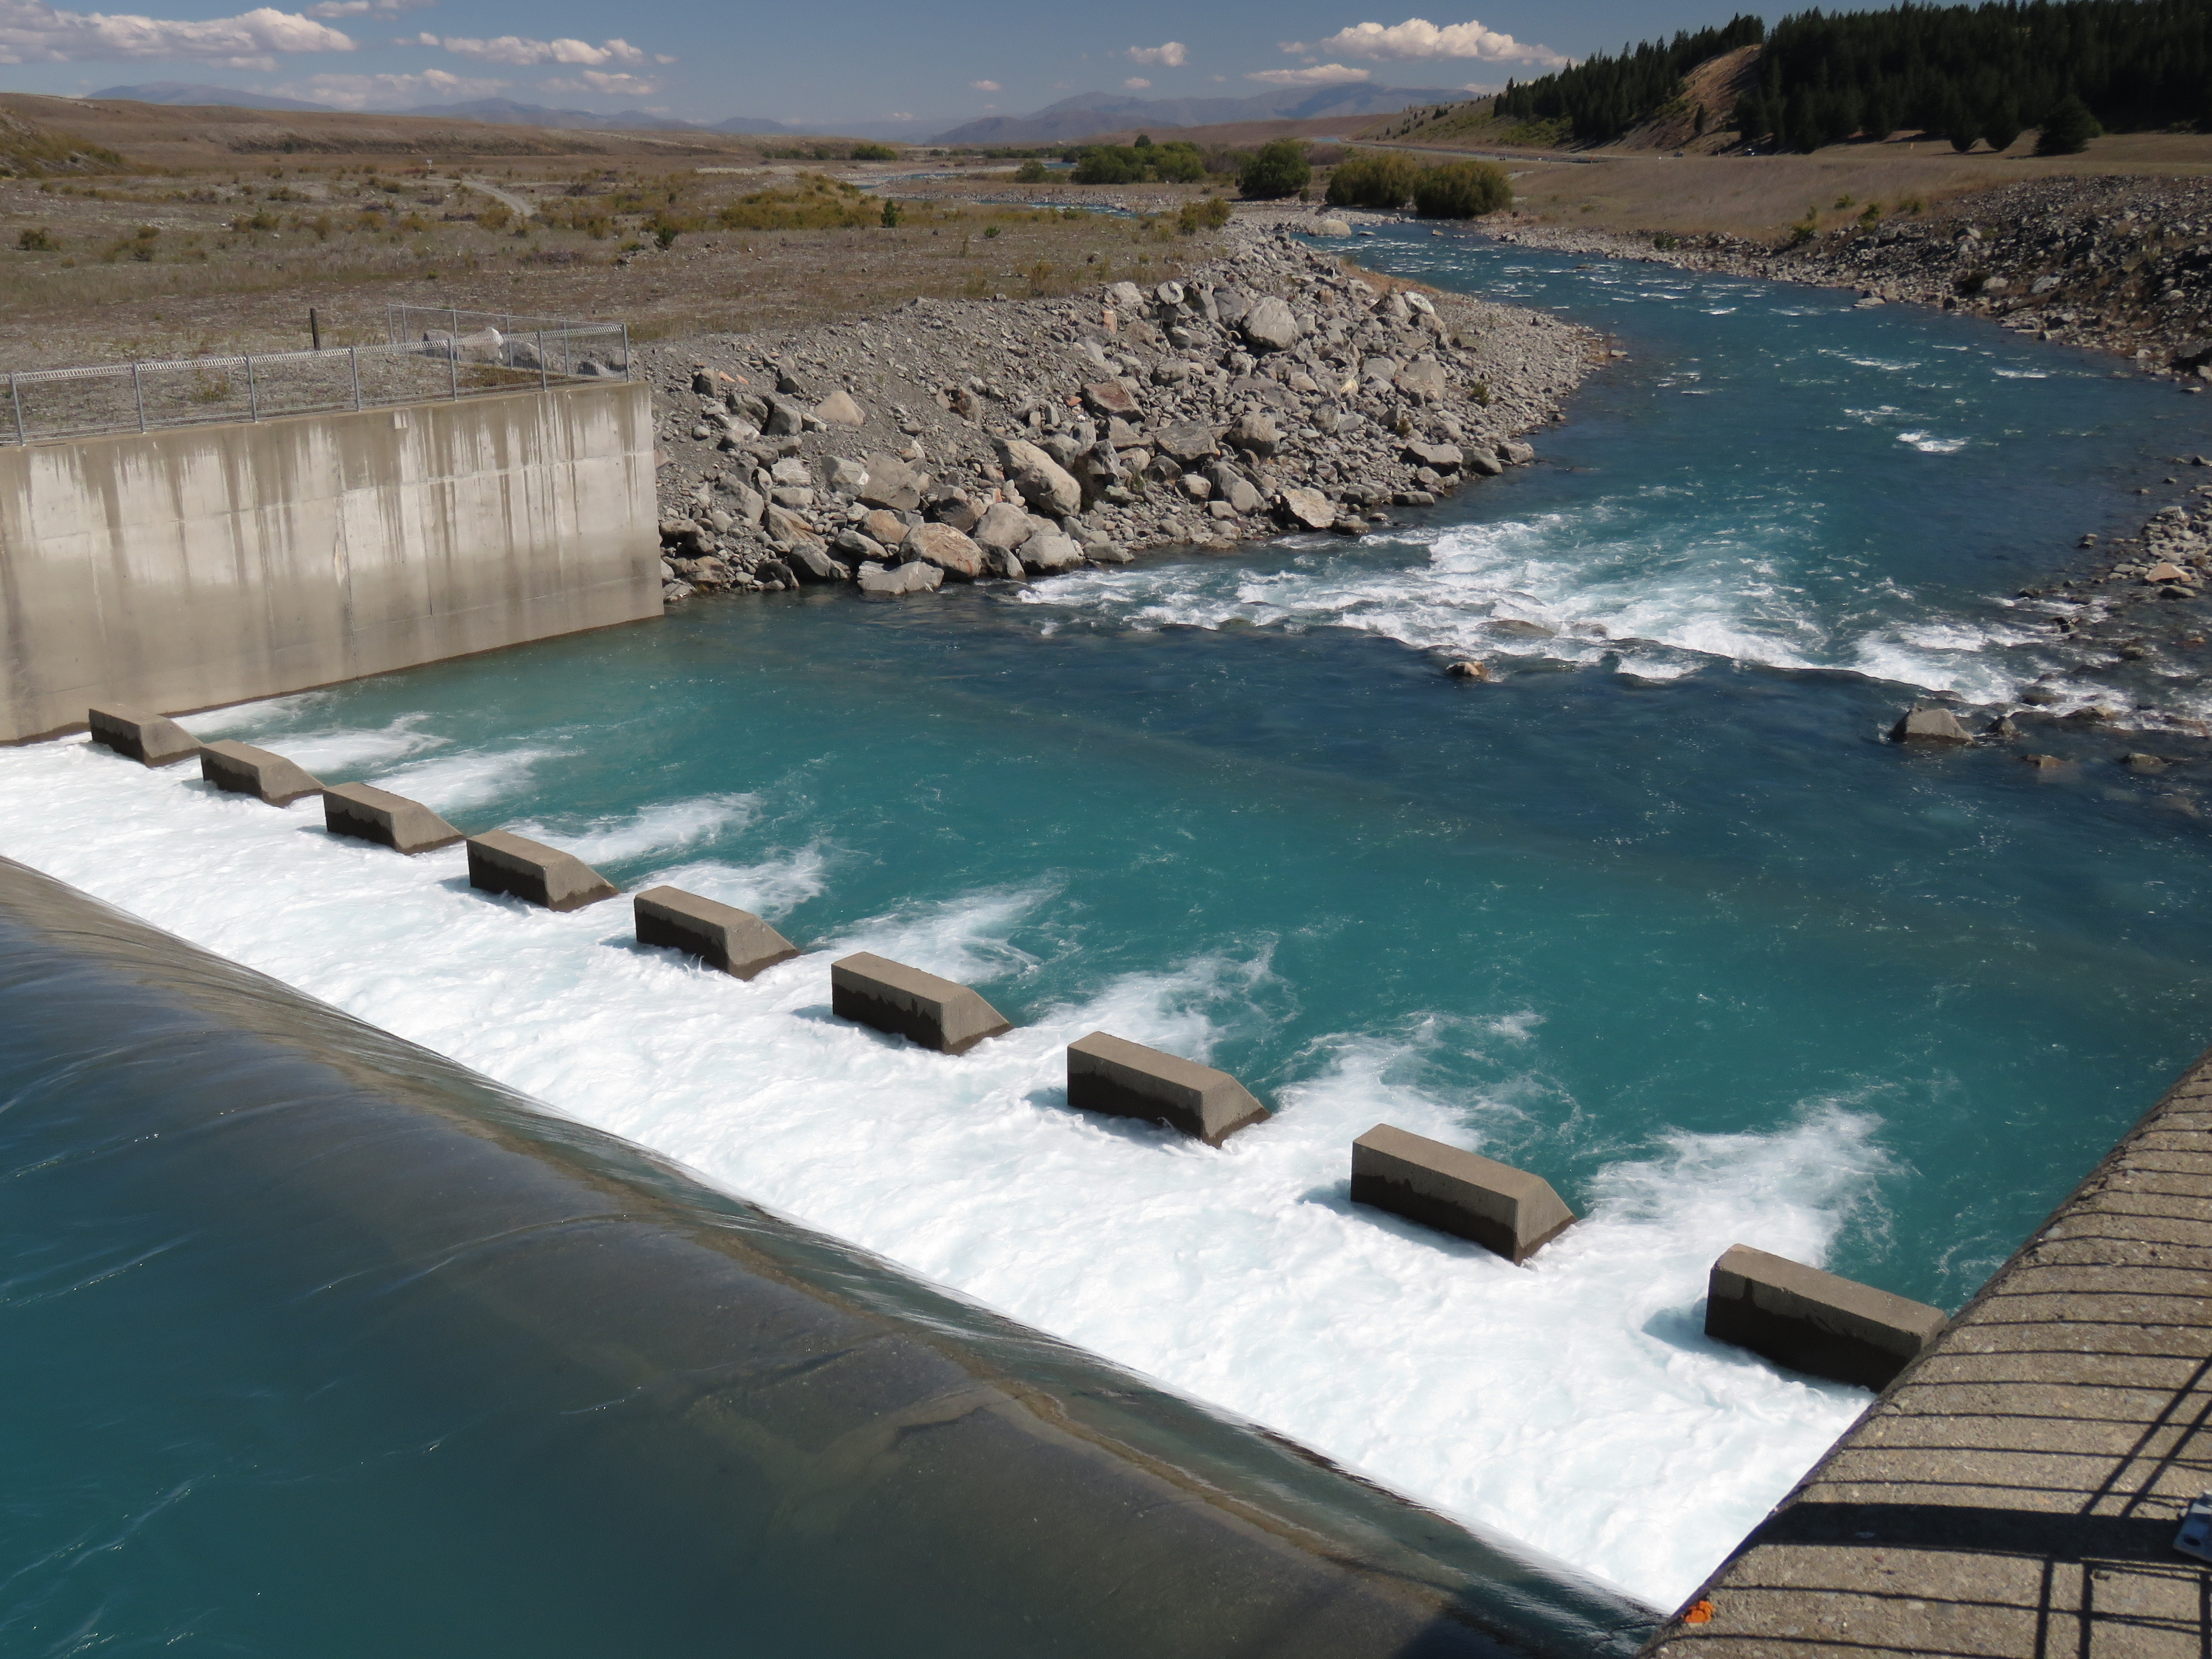 WFR2122.29 The Tekapo River recieving spilling flows from the Lake George Scott spillway weir Credit Rhys Adams